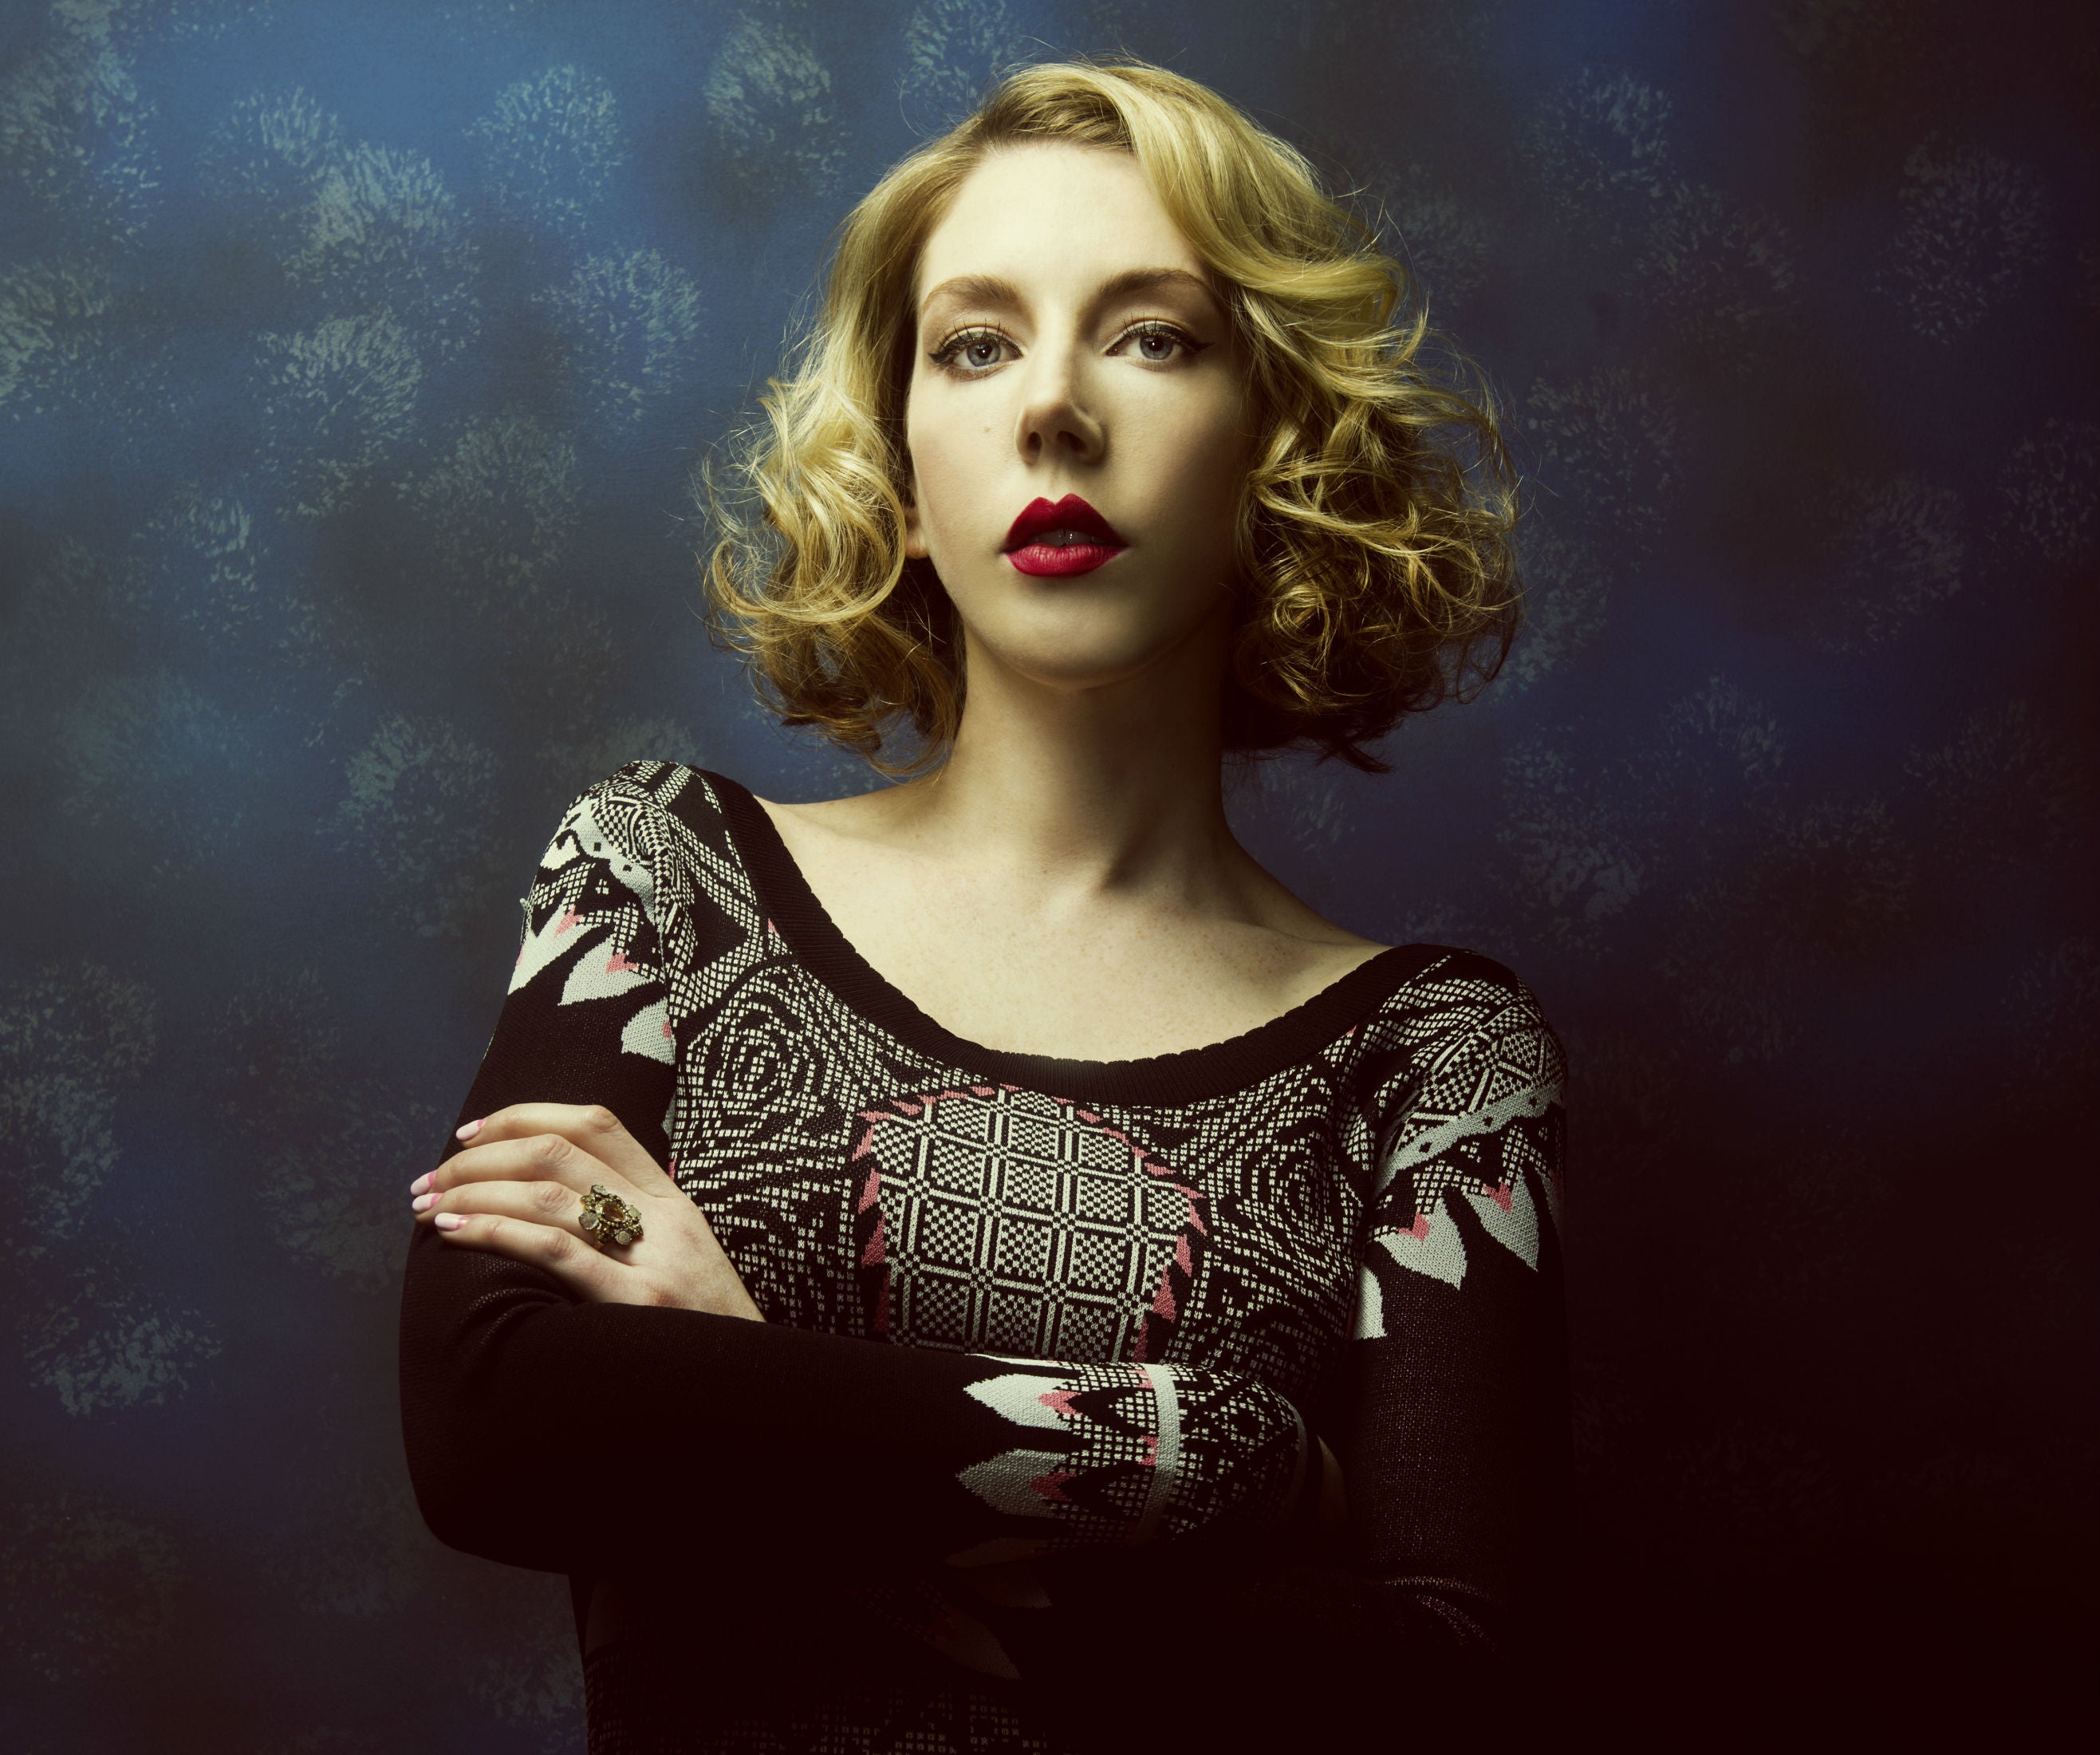 Katherine Ryan performs her new stand-up comedy show, Kathbum, at the Edinburgh Fringe